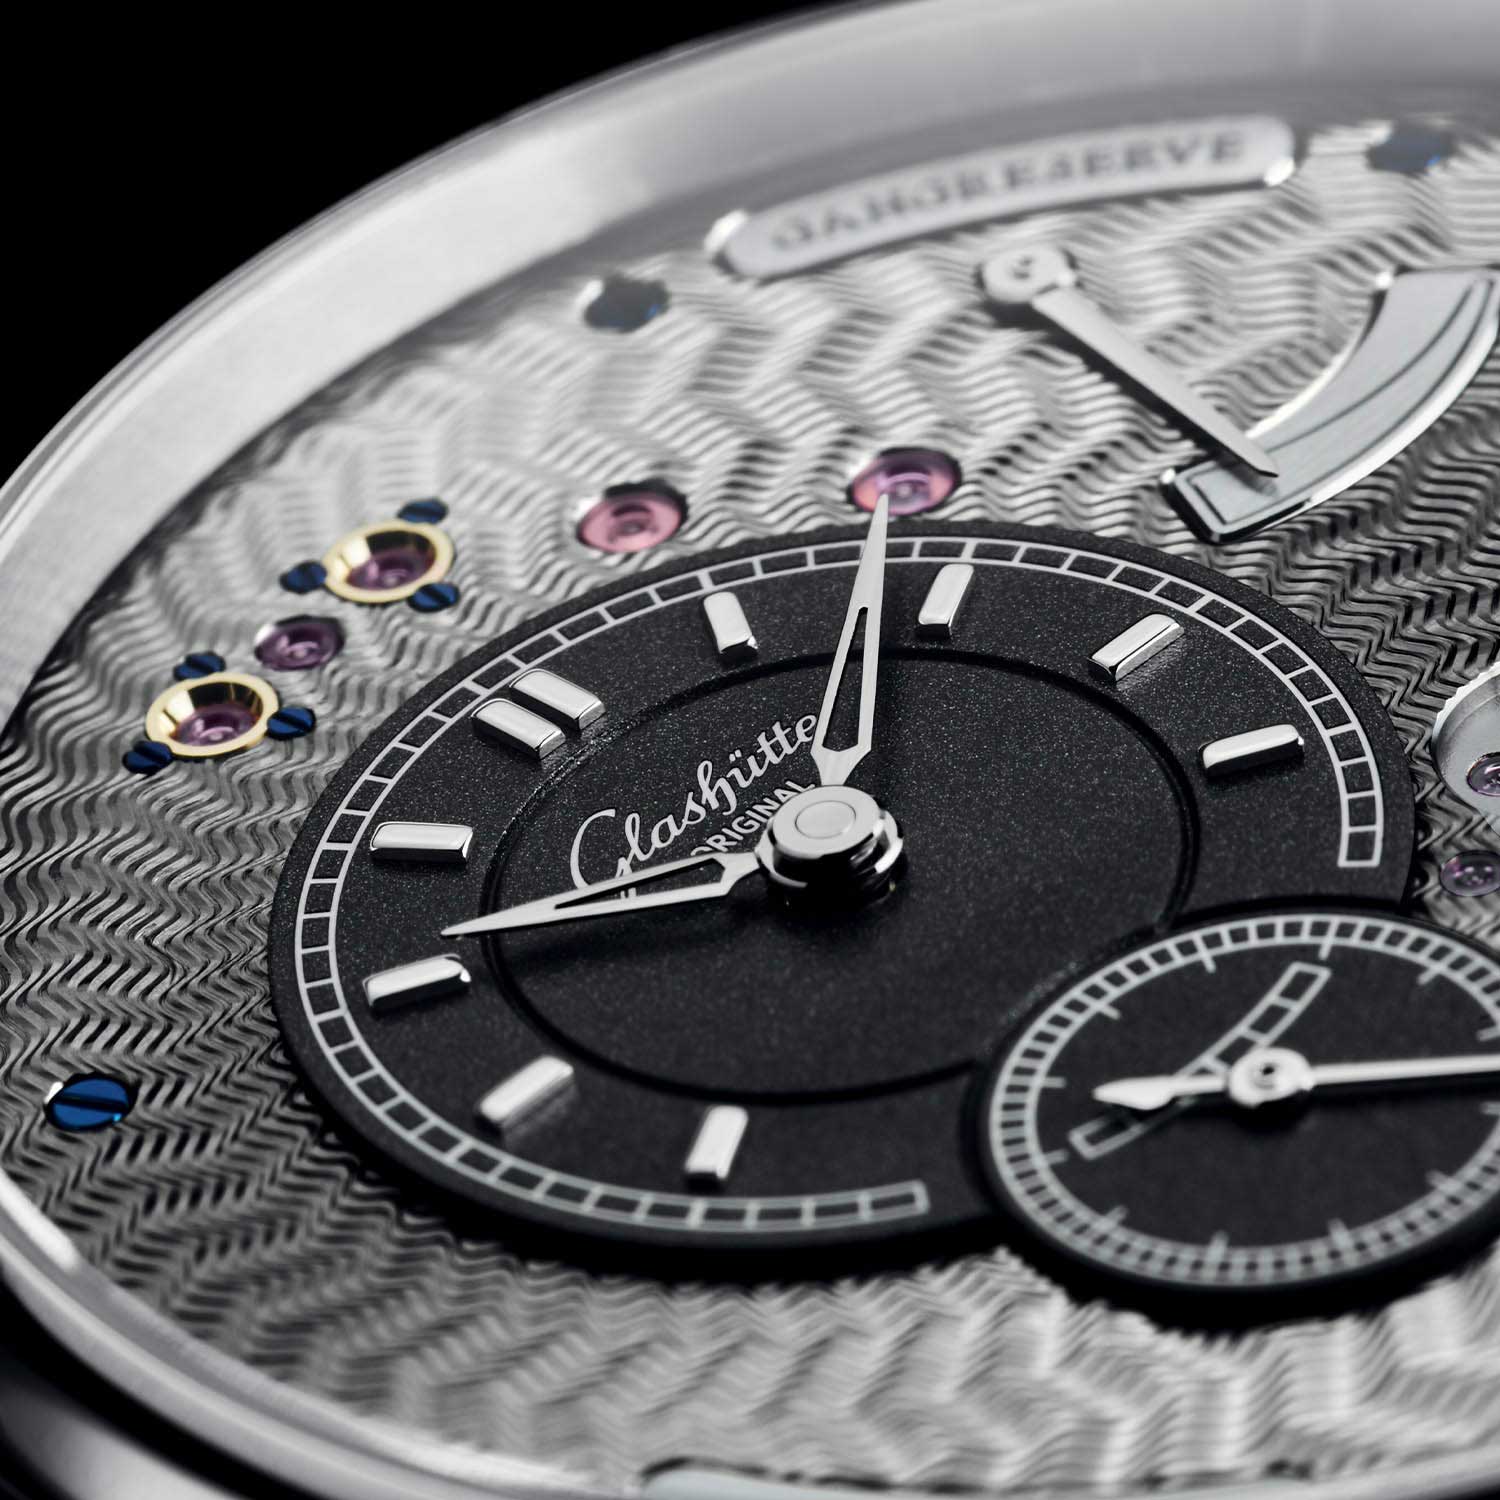 PanoInverse Platinum Limited Edition featuring Glashütte Original’s signature three-quarter plate with guilloché engraving and a partially skeletonized baseplate inspired by the design of the glass dome that sits atop of Dresden Academy of Fine Arts